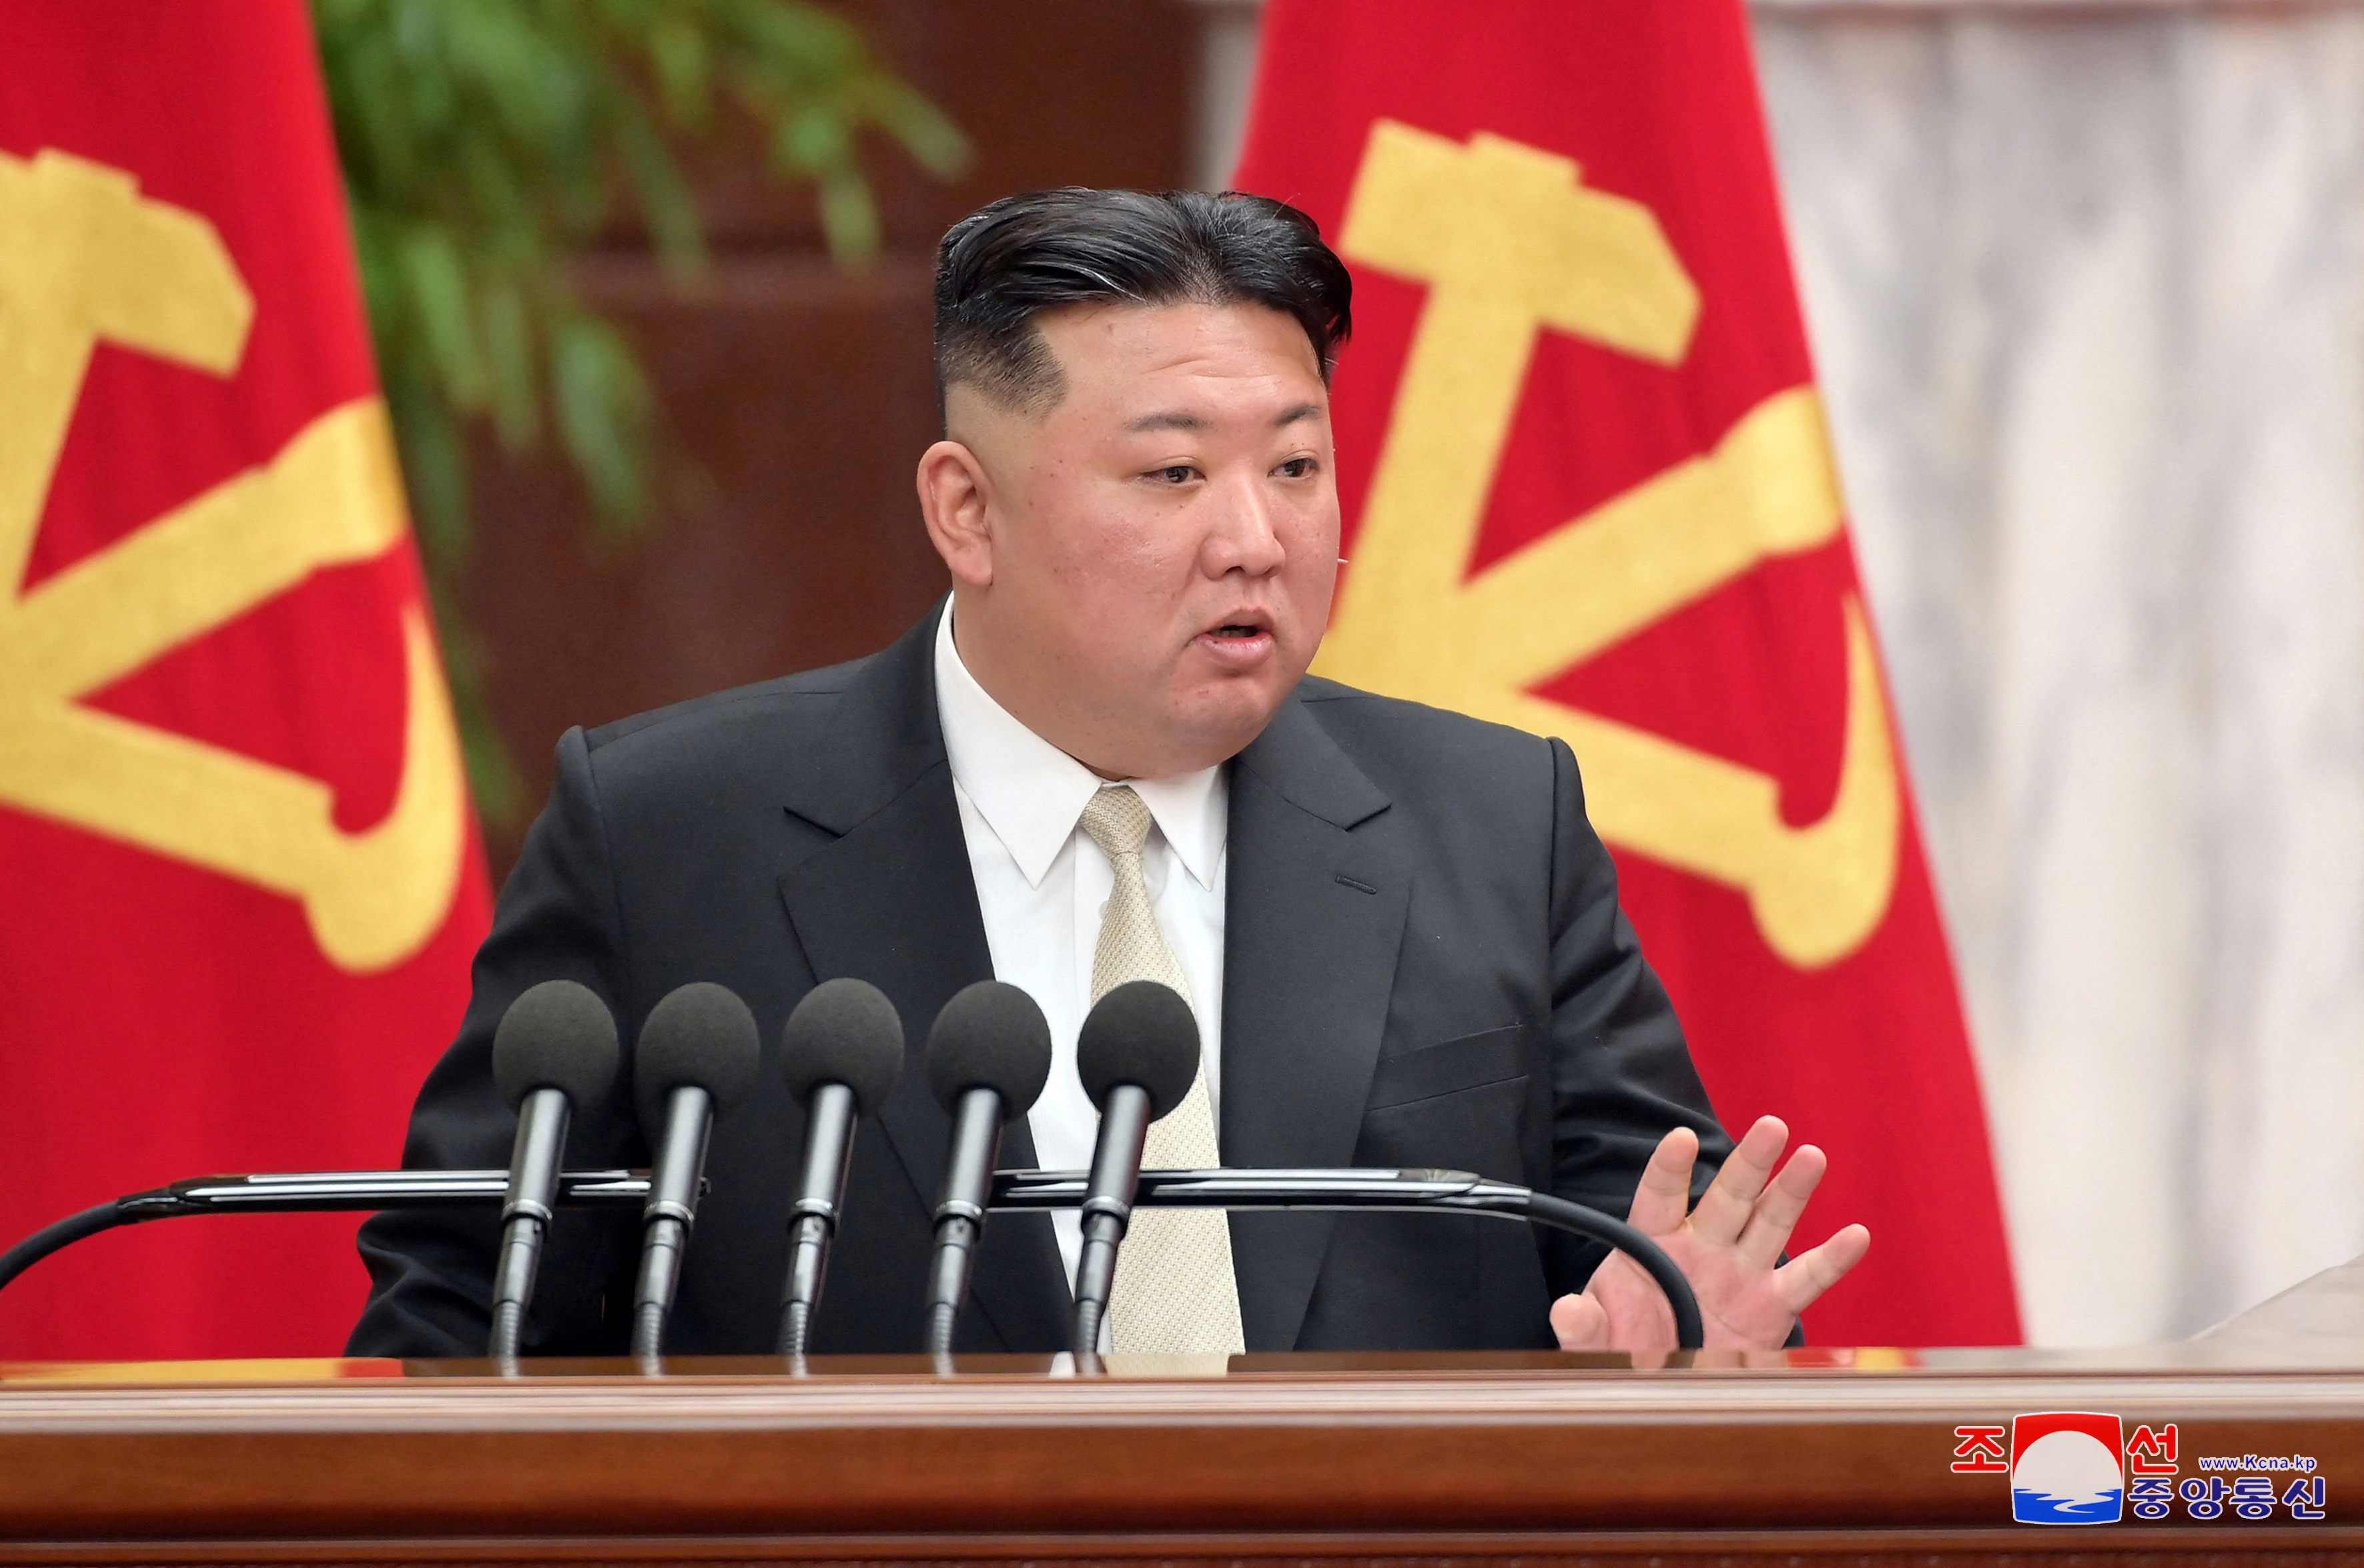 North Korean leader Kim Jong Un attends the 7th enlarged plenary meeting of the 8th Central Committee of the Workers' Party of Korea (WPK) in Pyongyang